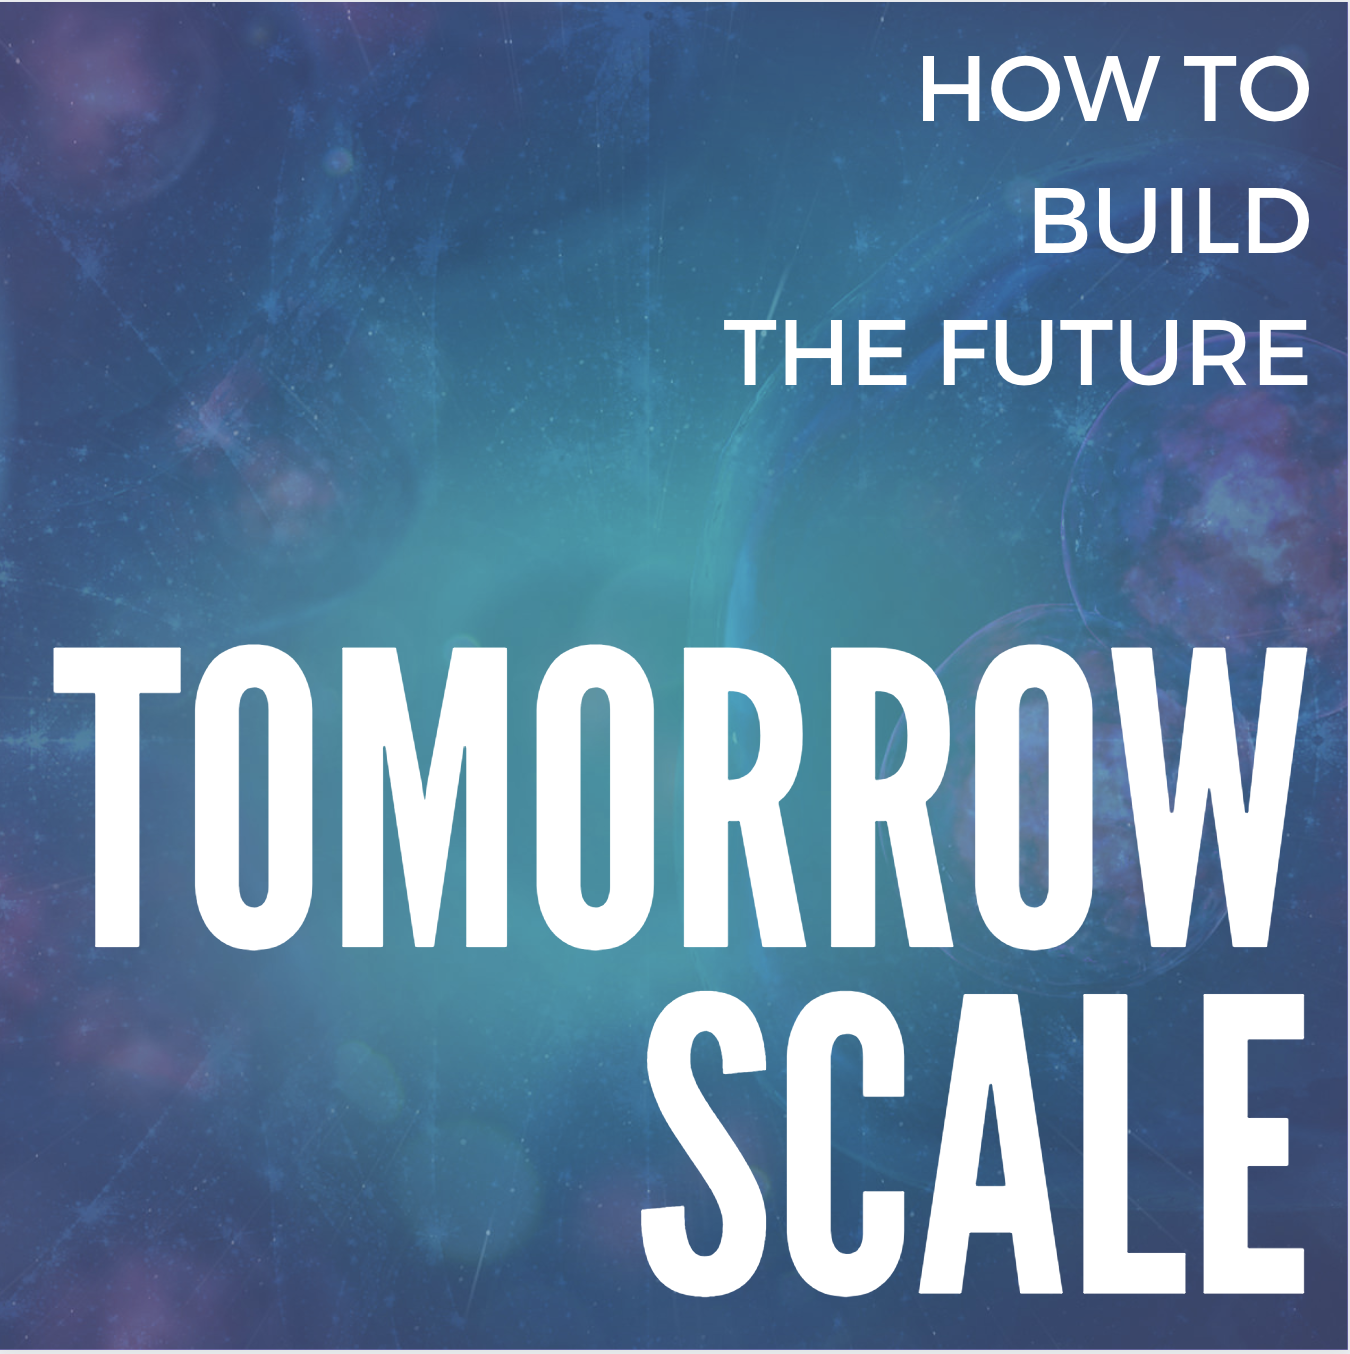 TomorrowScale Podcast Preview